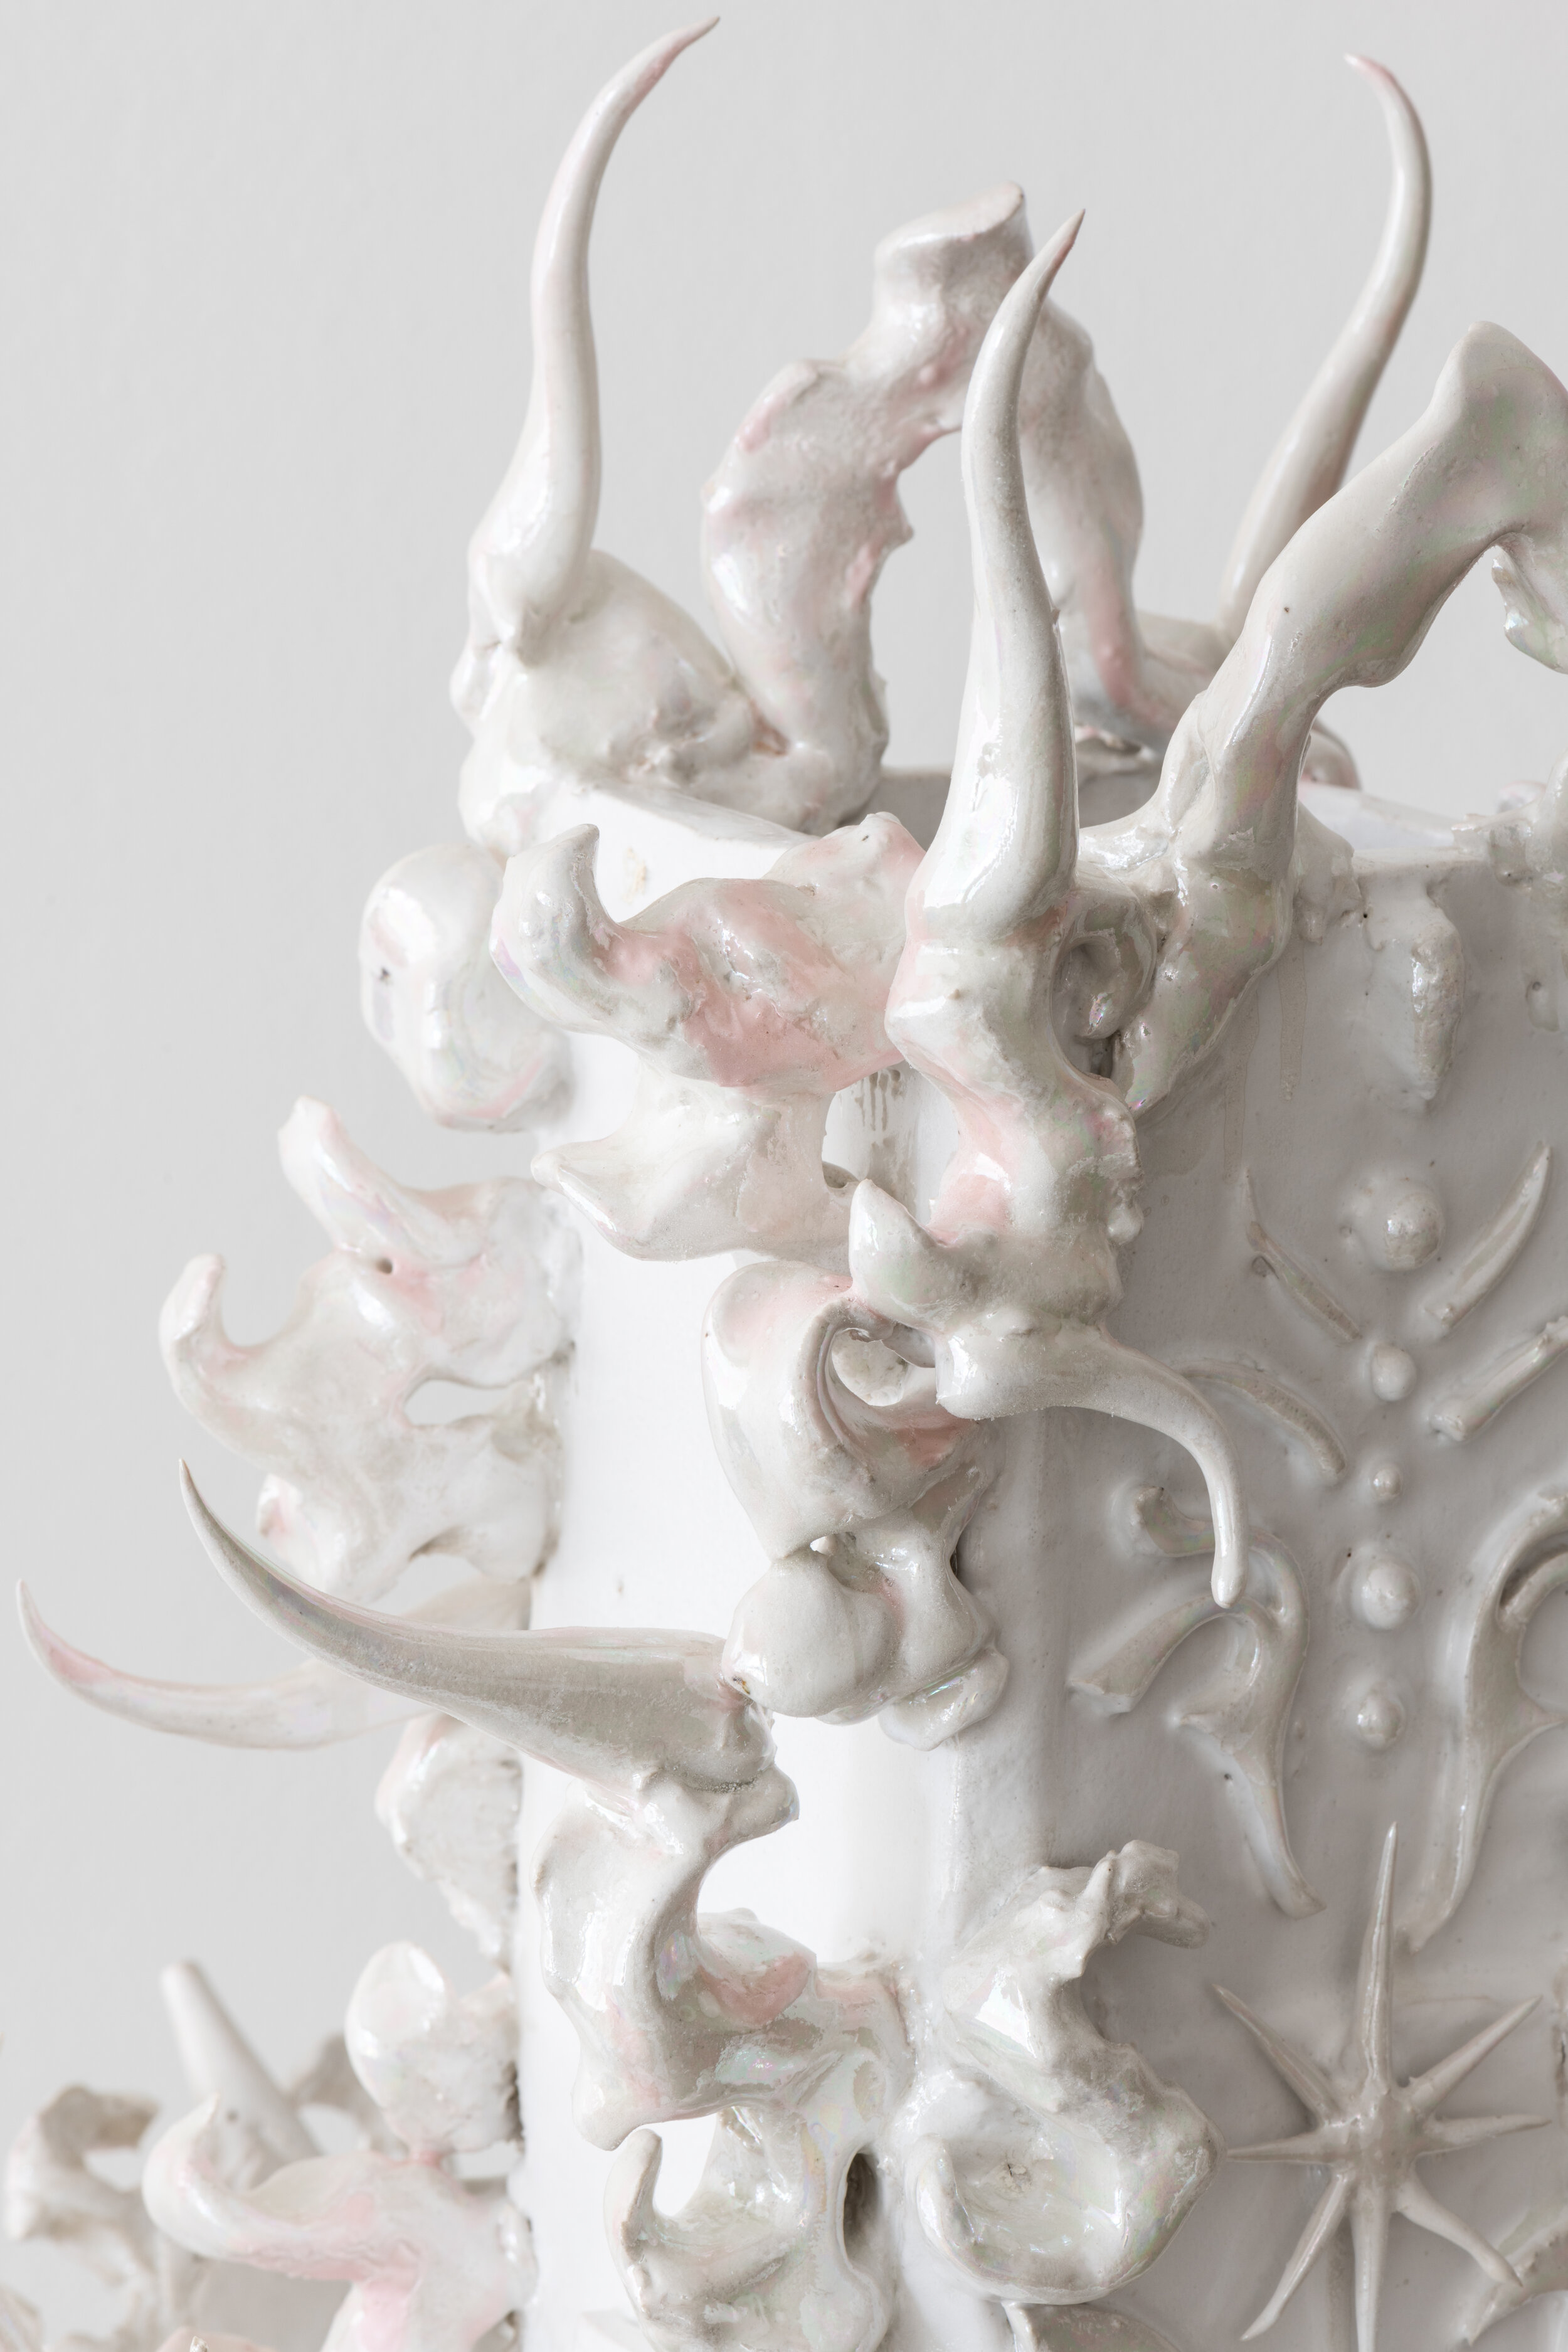  Detail view of  Evangeline AdaLioryn  Lotus Vessel  2021 Glazed porcelaineous stoneware, luster 26 x 14 x 17 inches  Photo by Ruben Diaz 